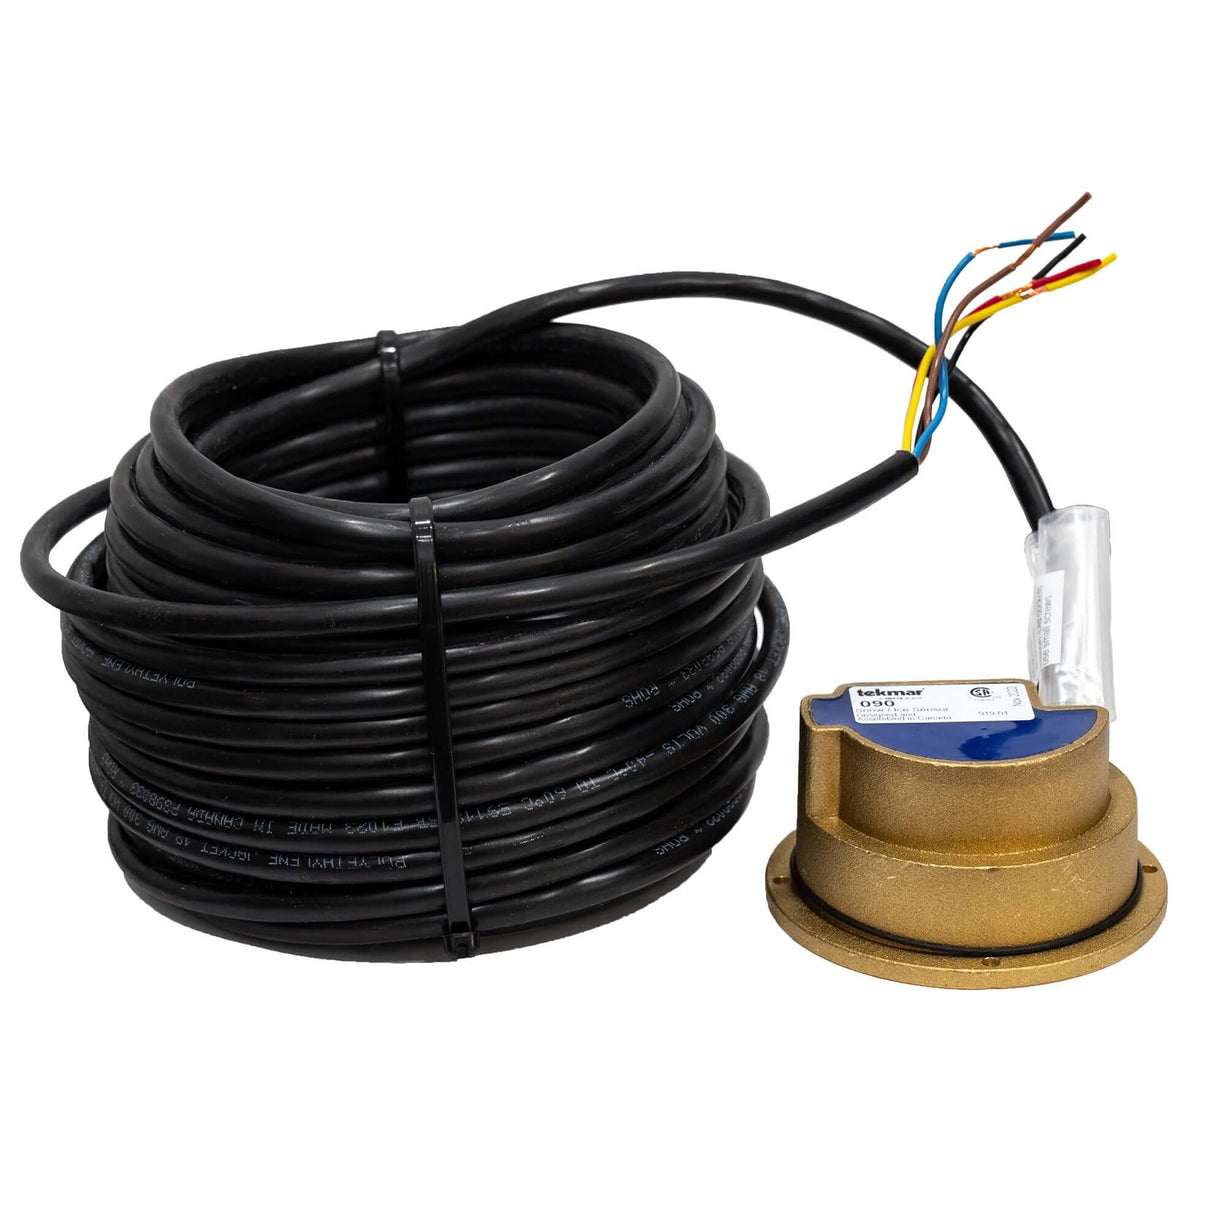 Tekmar 090 Snow and ice sensor for snow melting system - sensor with wires below view 